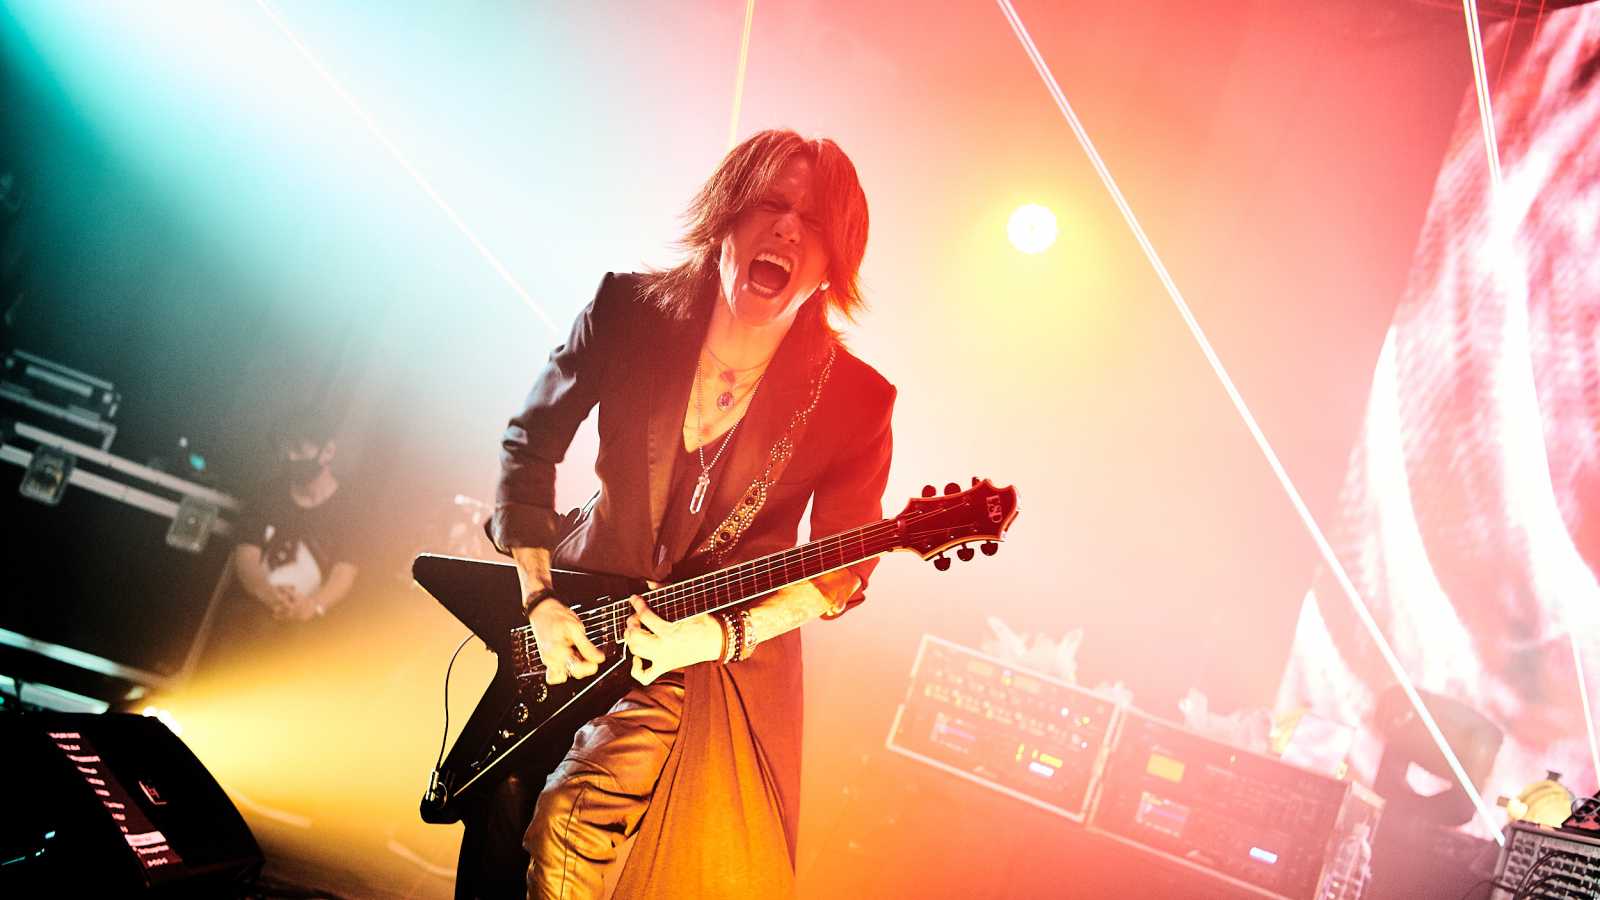 SUGIZO LIVE STREAMING FROM TOKYO EPISODE I ~RE-ECHO TO COSMIC DANCE~ © Keiko Tanabe